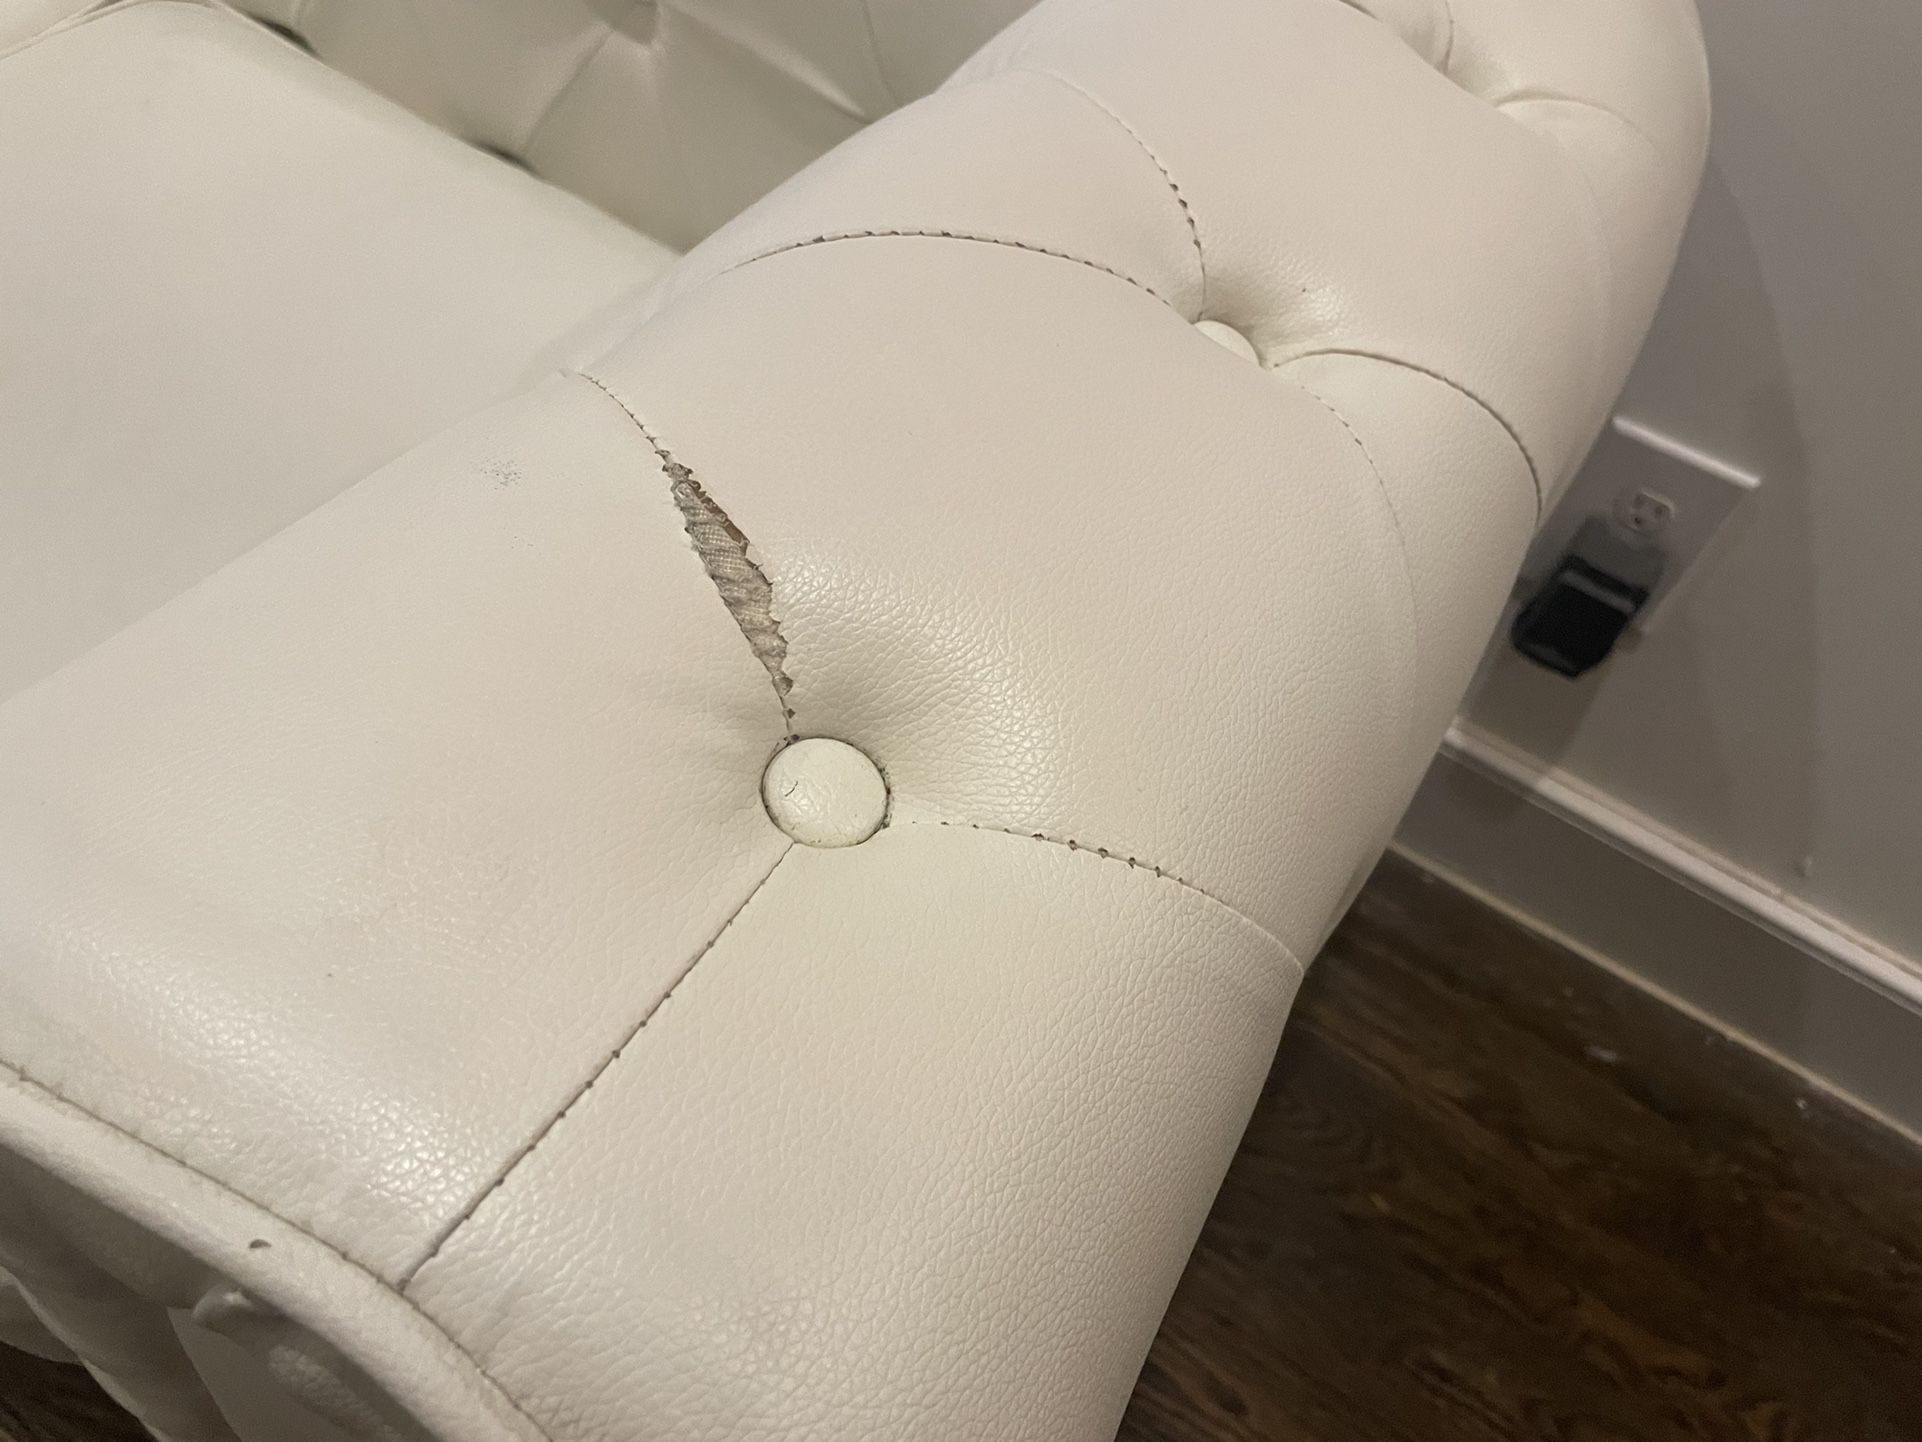 White Leather Tufted Couches